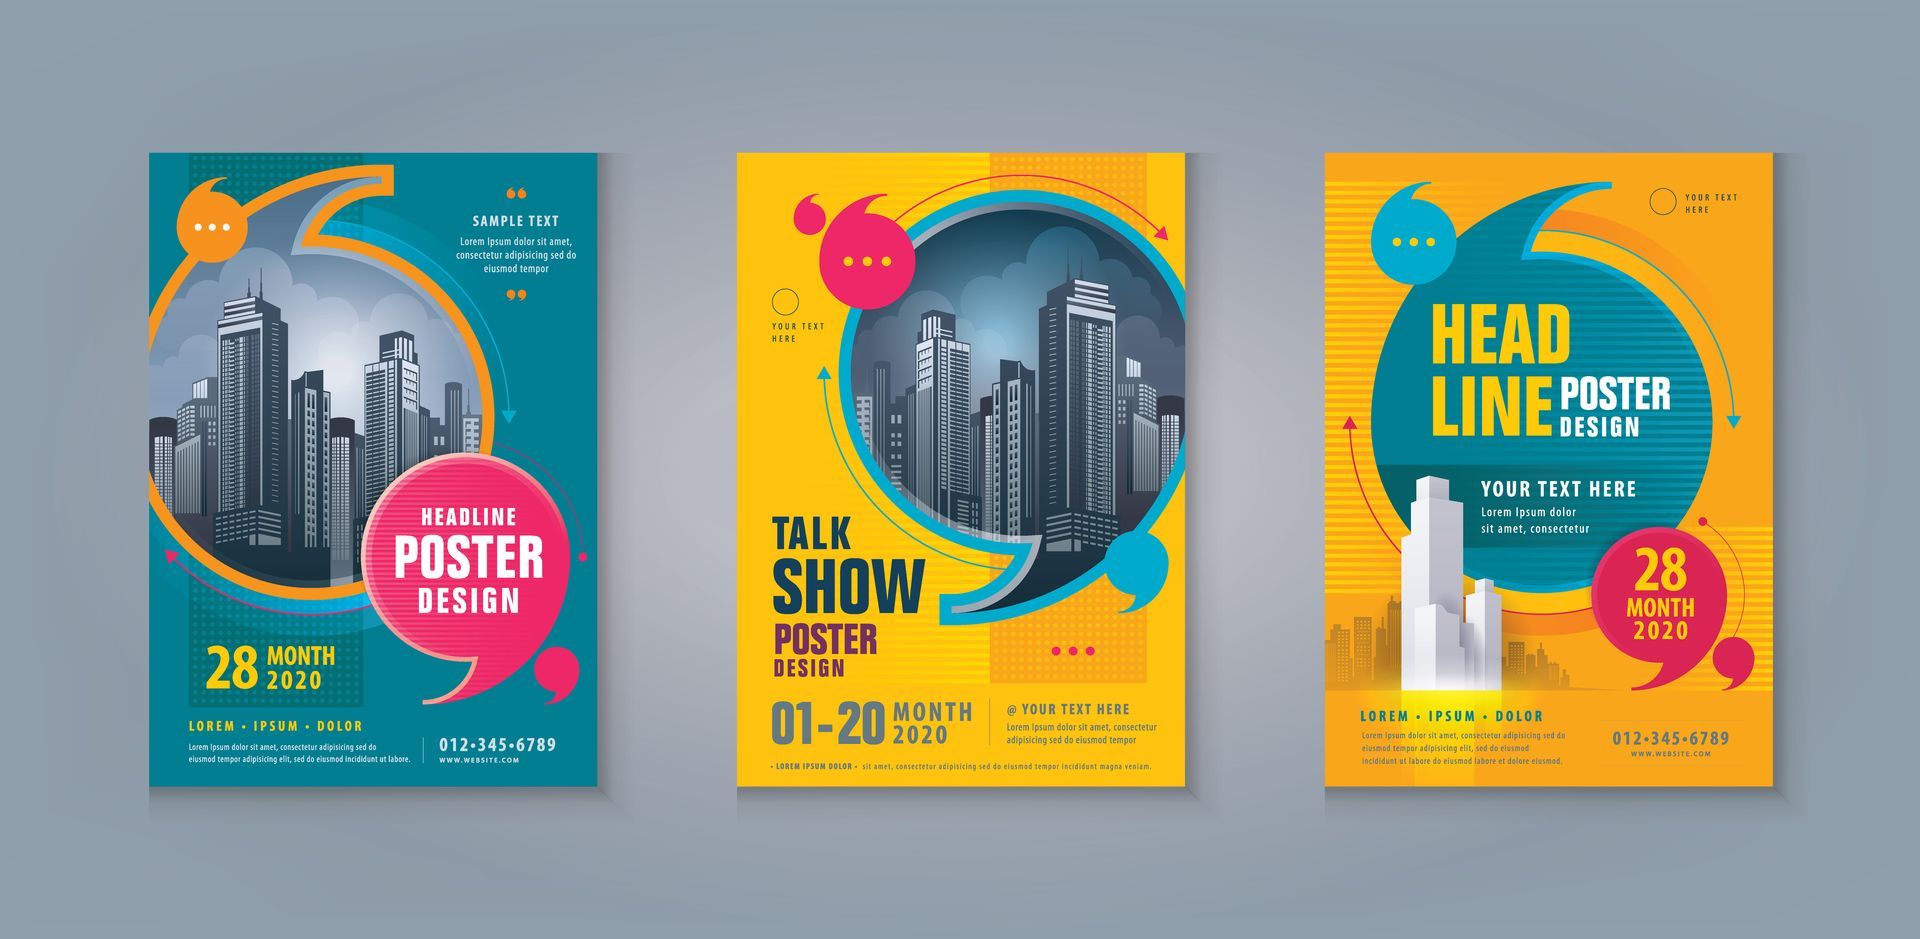 Shea Custom Posters For Conferences & Trade Shows